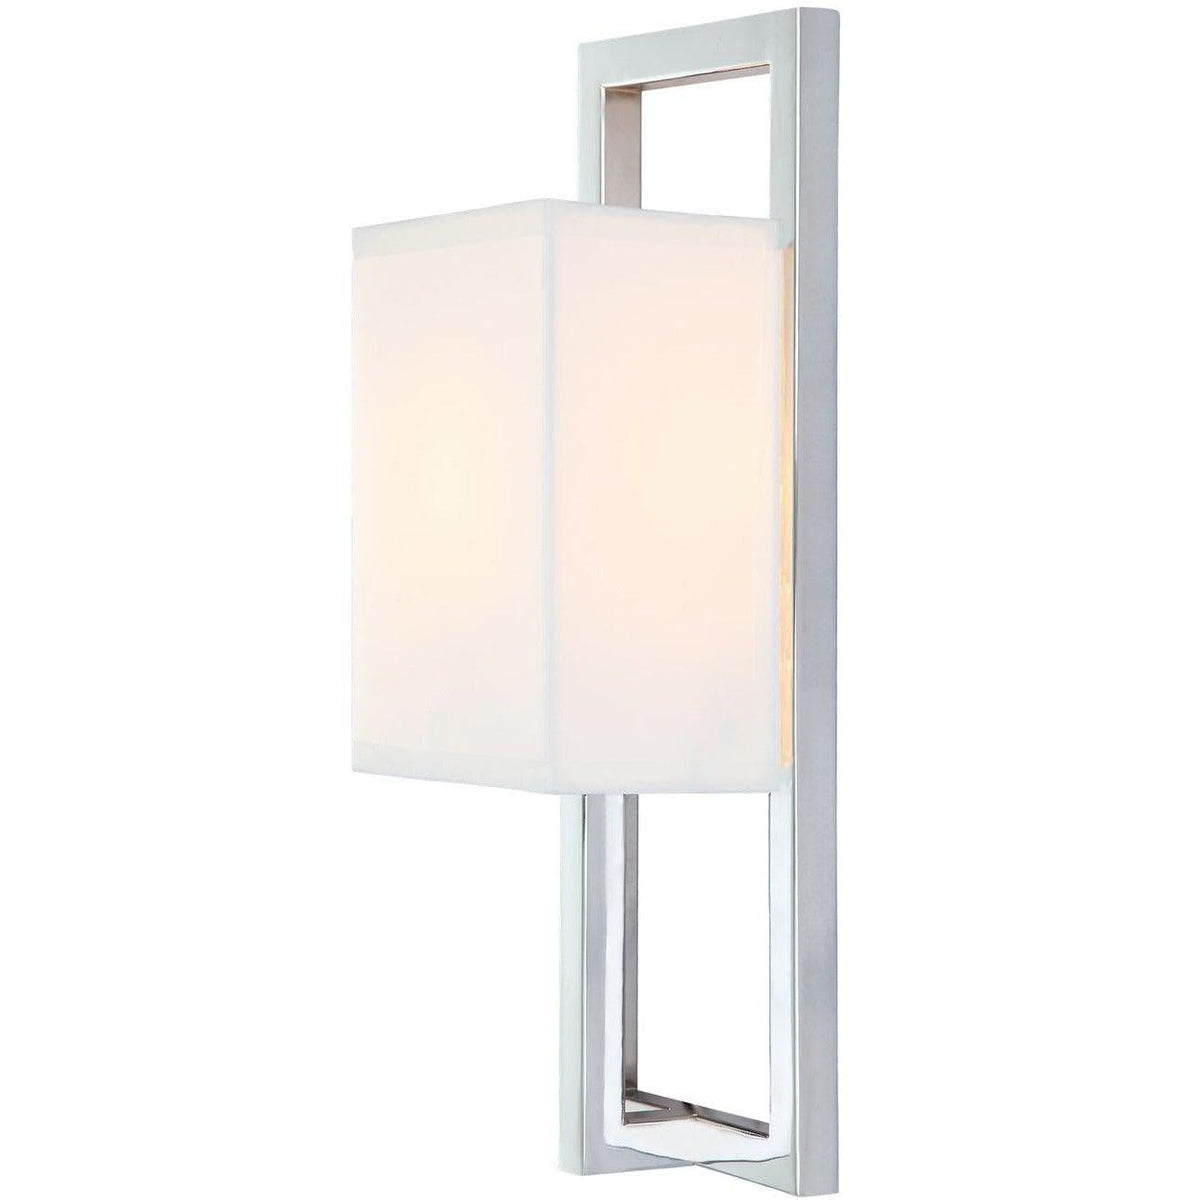 Matteo Lighting - Cadre Wall Sconce - S00101CH | Montreal Lighting & Hardware